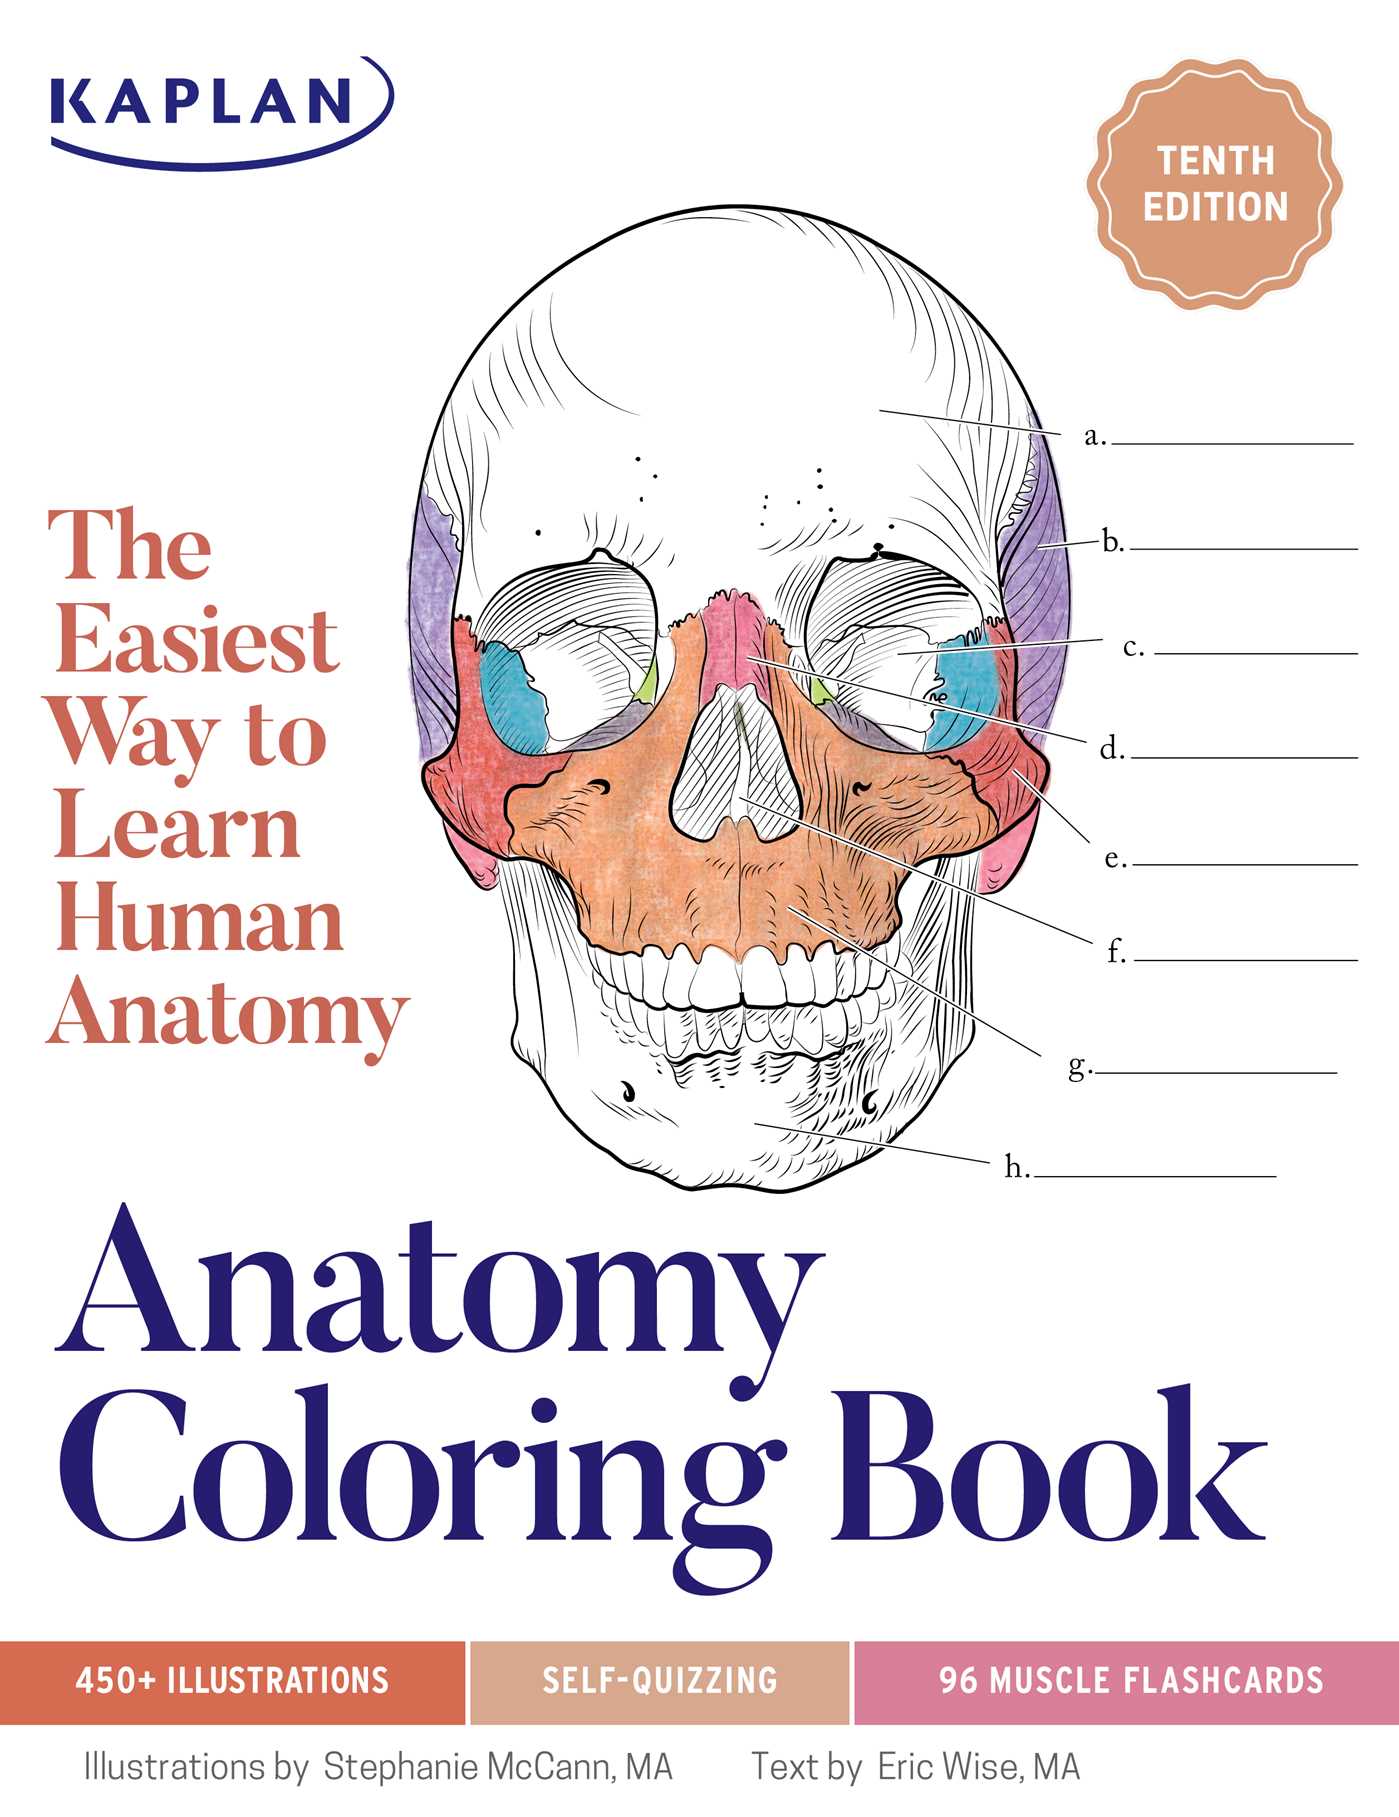 ANATOMY COLORING BOOK